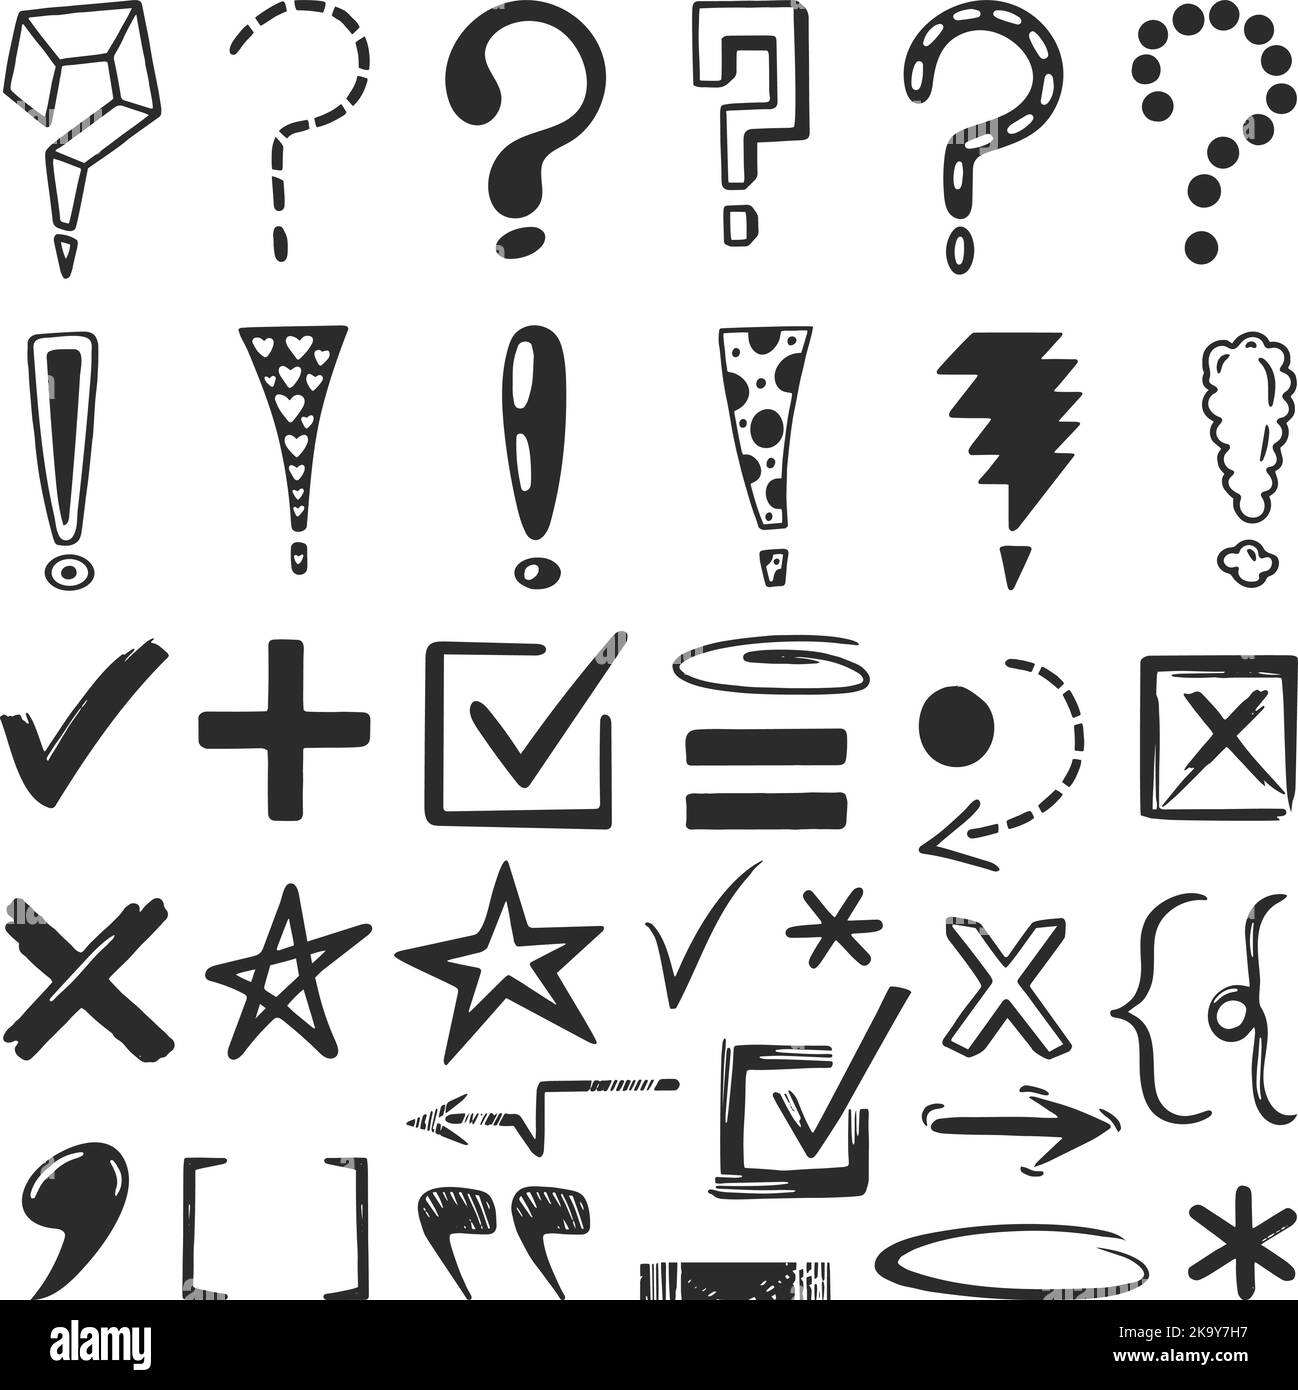 Doodle marks and signs. Sketch question, exclamation sign. Grunge doubt and check elements. Tick markers, yes and no, brackets neoteric vector set Stock Vector